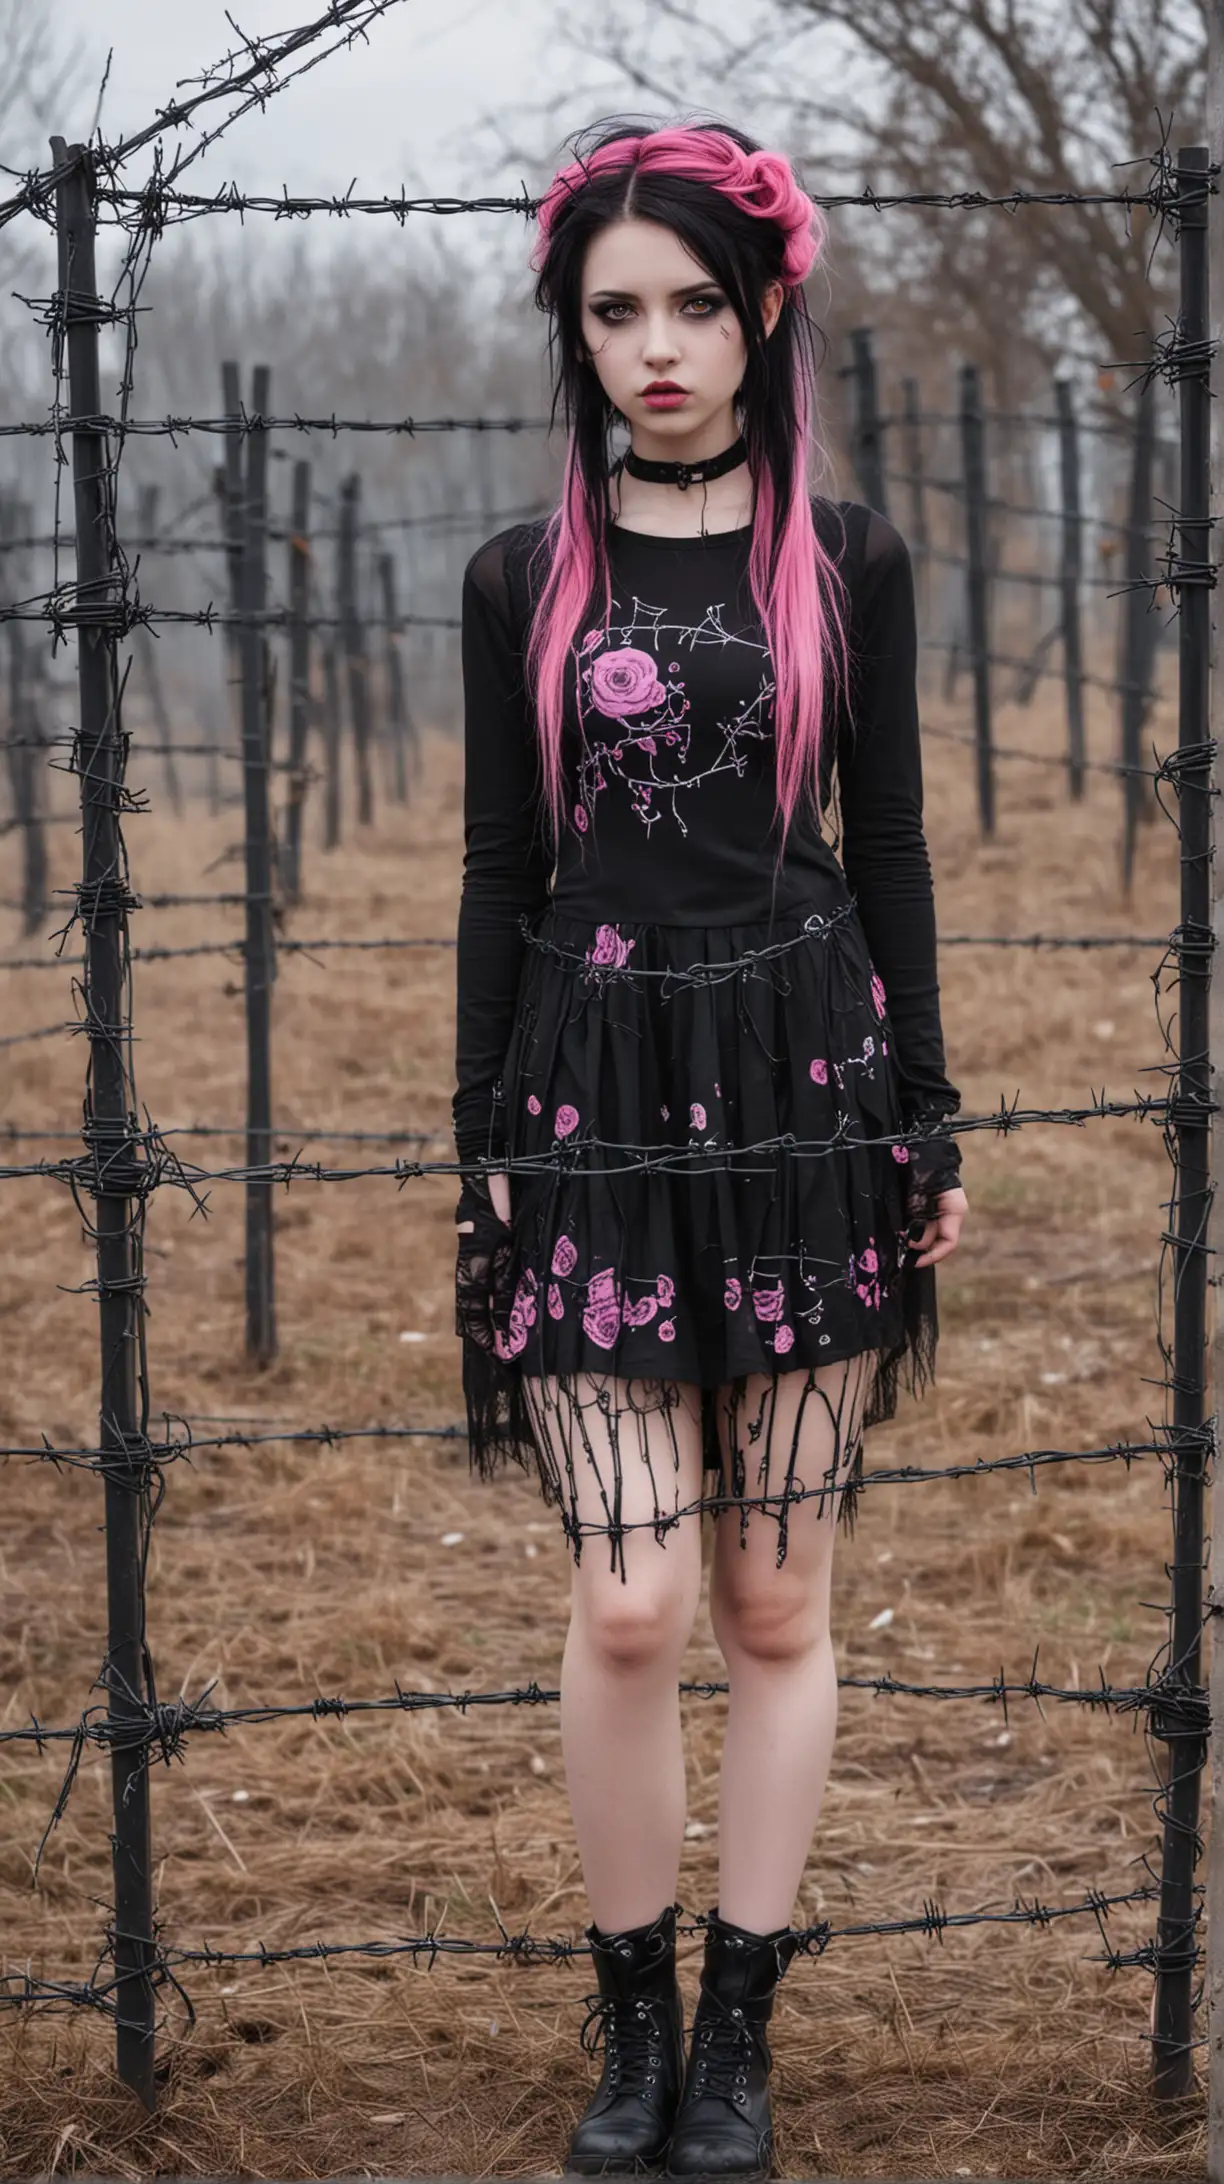 PinkThemed Pretty Goth Girl Surrounded by Barbed Wire